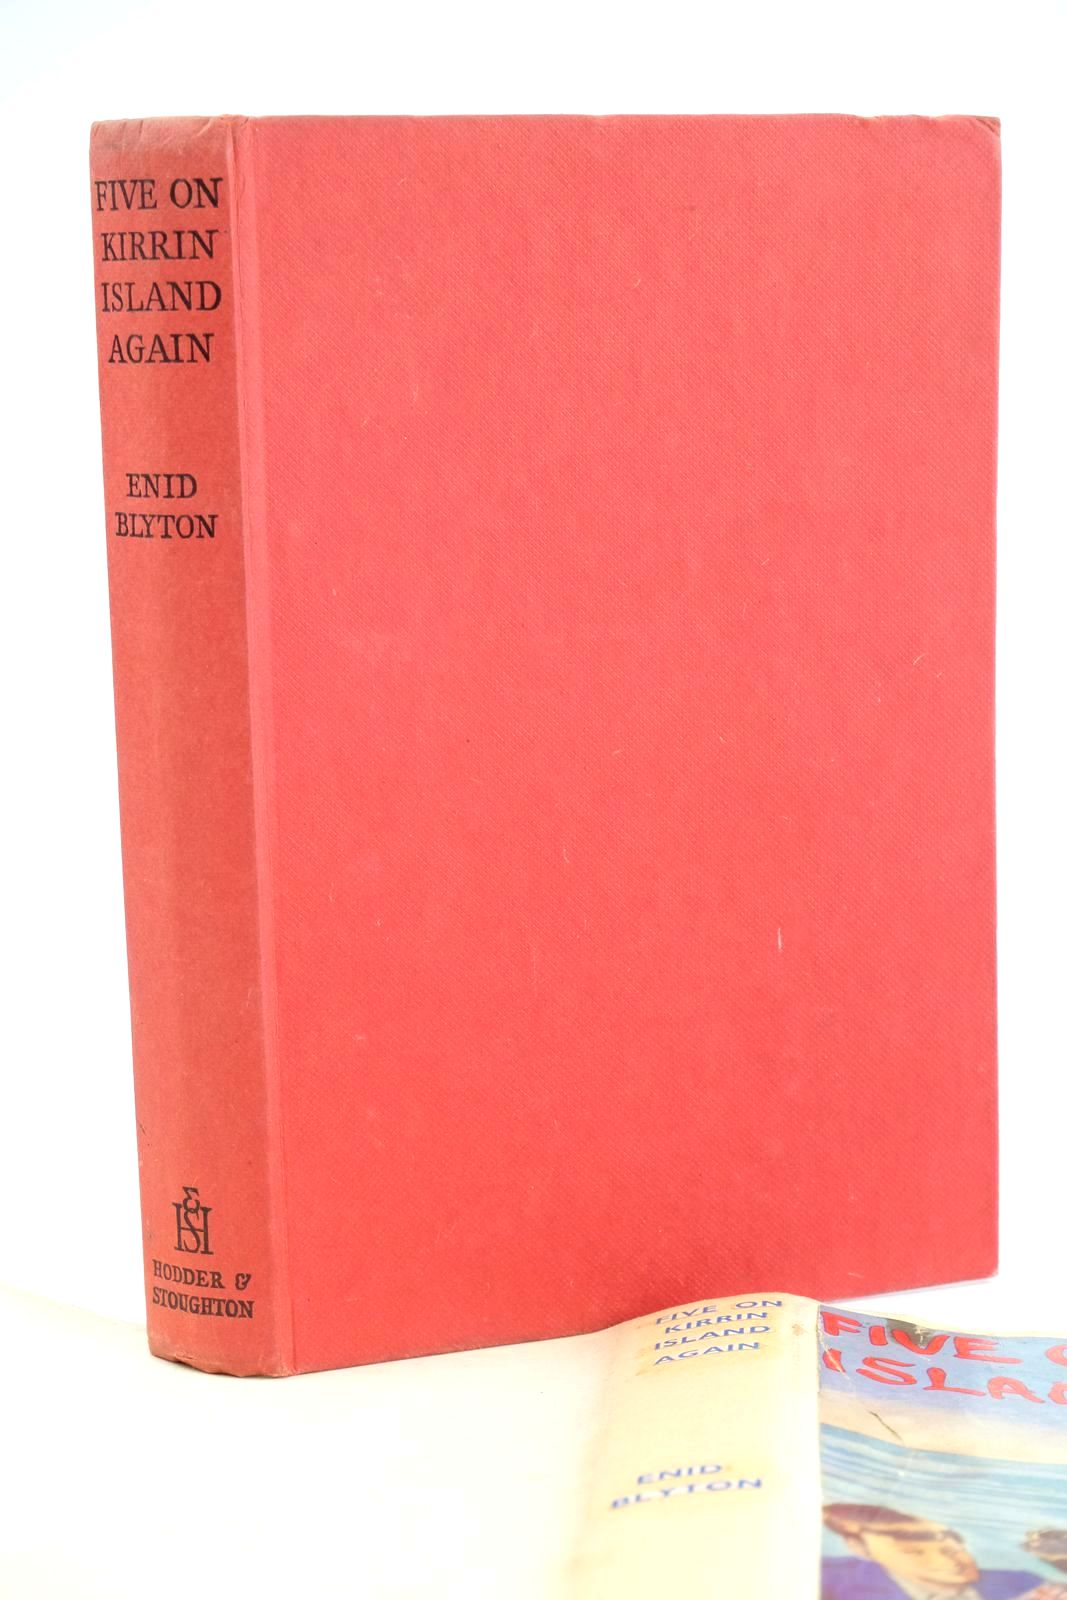 Photo of FIVE ON KIRRIN ISLAND AGAIN written by Blyton, Enid illustrated by Soper, Eileen published by Hodder &amp; Stoughton (STOCK CODE: 1324888)  for sale by Stella & Rose's Books